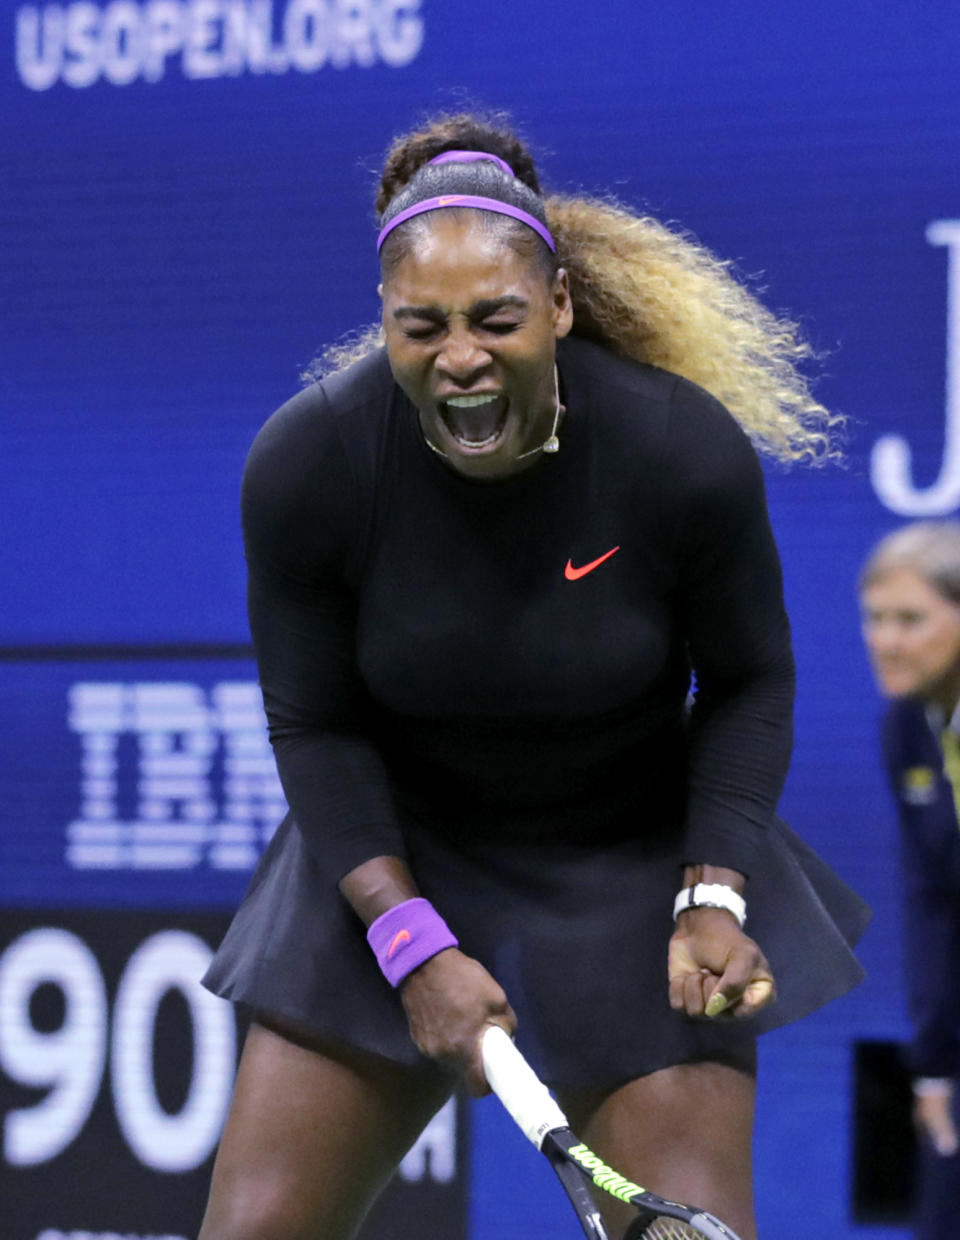 Serena Williams, of the United States, screams after winning a point against Caty McNally, of the United States, during the second round of the U.S. Open tennis tournament in New York, Wednesday, Aug. 28, 2019. (AP Photo/Charles Krupa)